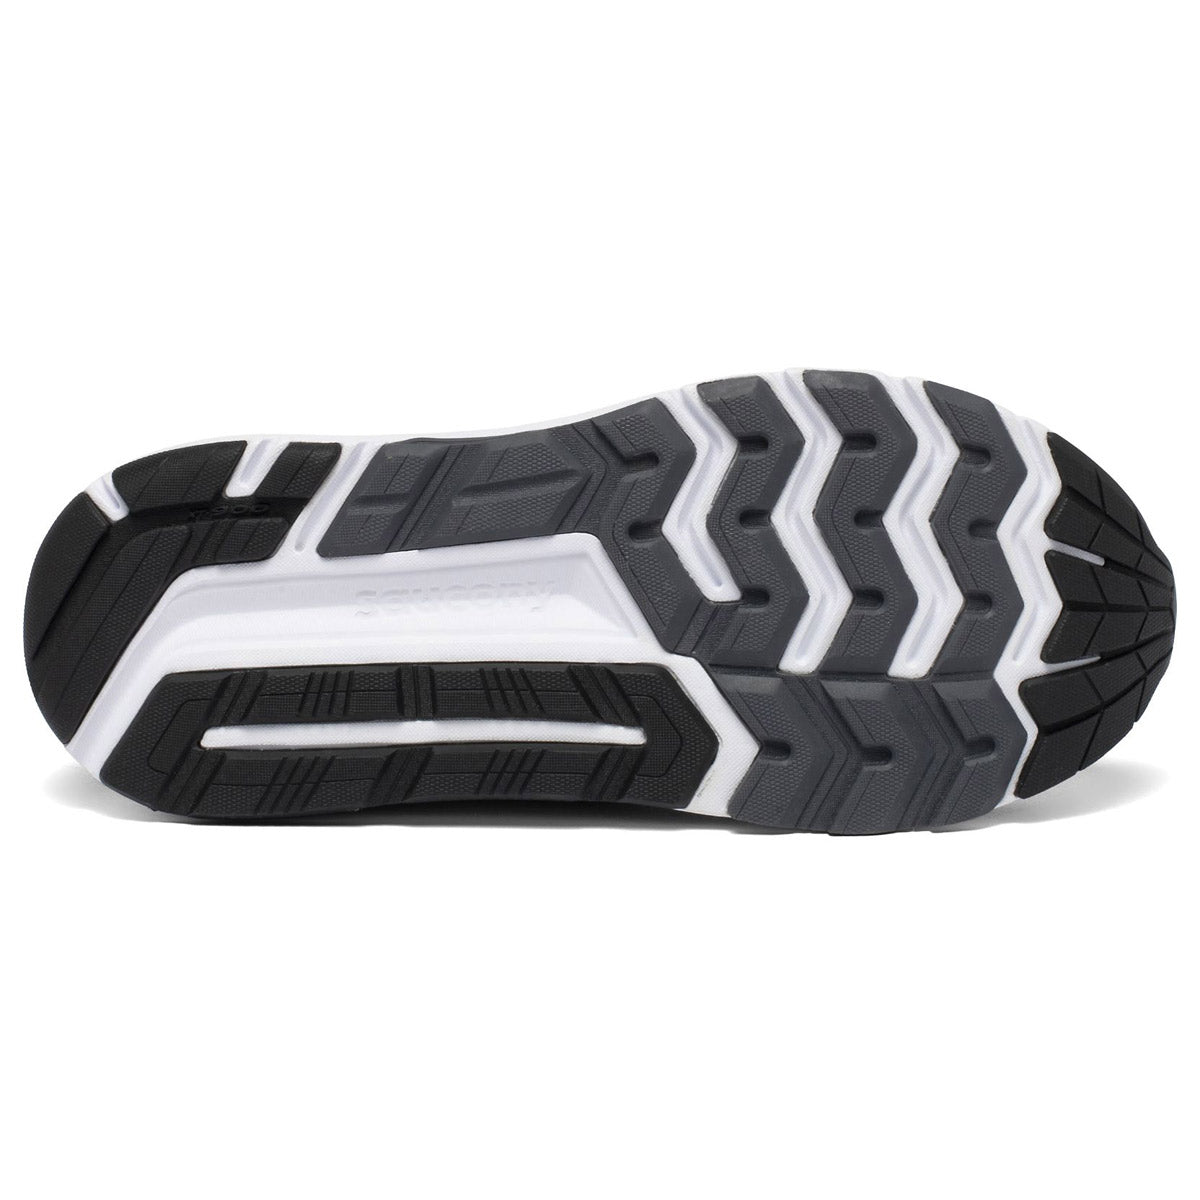 The sole of a modern athletic shoe, like the Saucony Echelon 8 Black/White - Mens, with a patterned tread and cushioning technology.